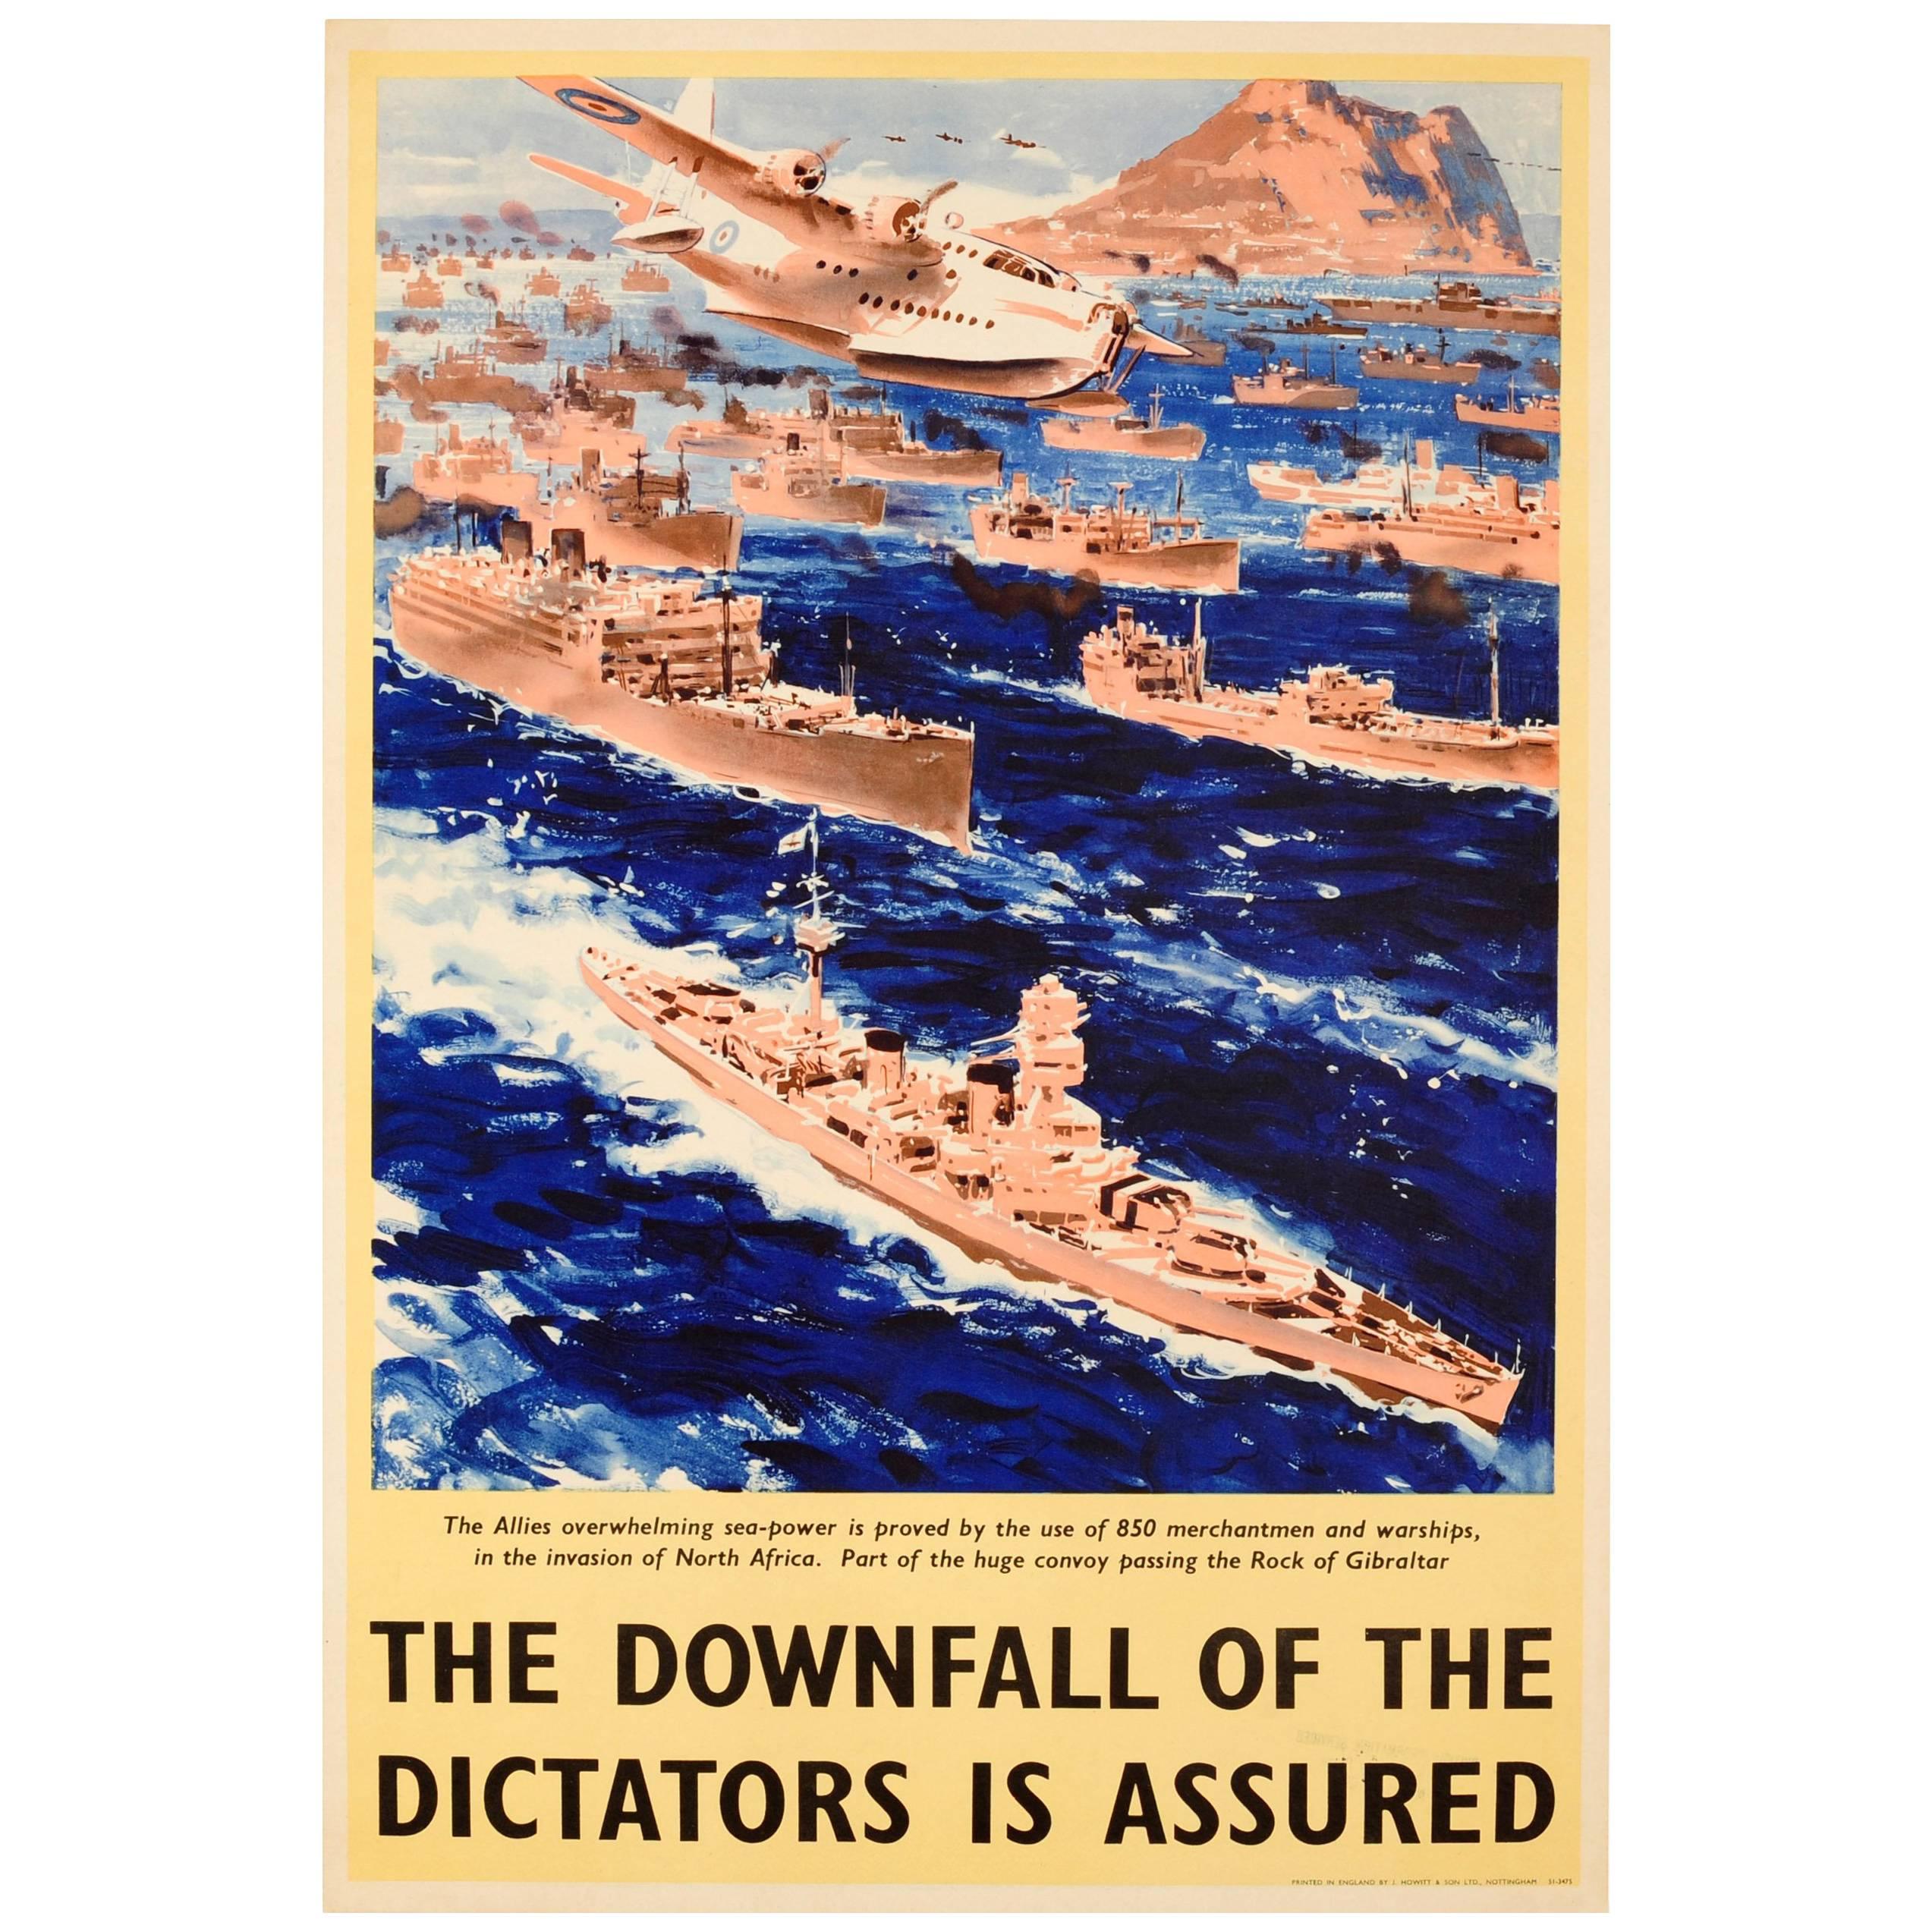 Original WWII Downfall of the Dictators Poster - North Africa Rock of Gibraltar